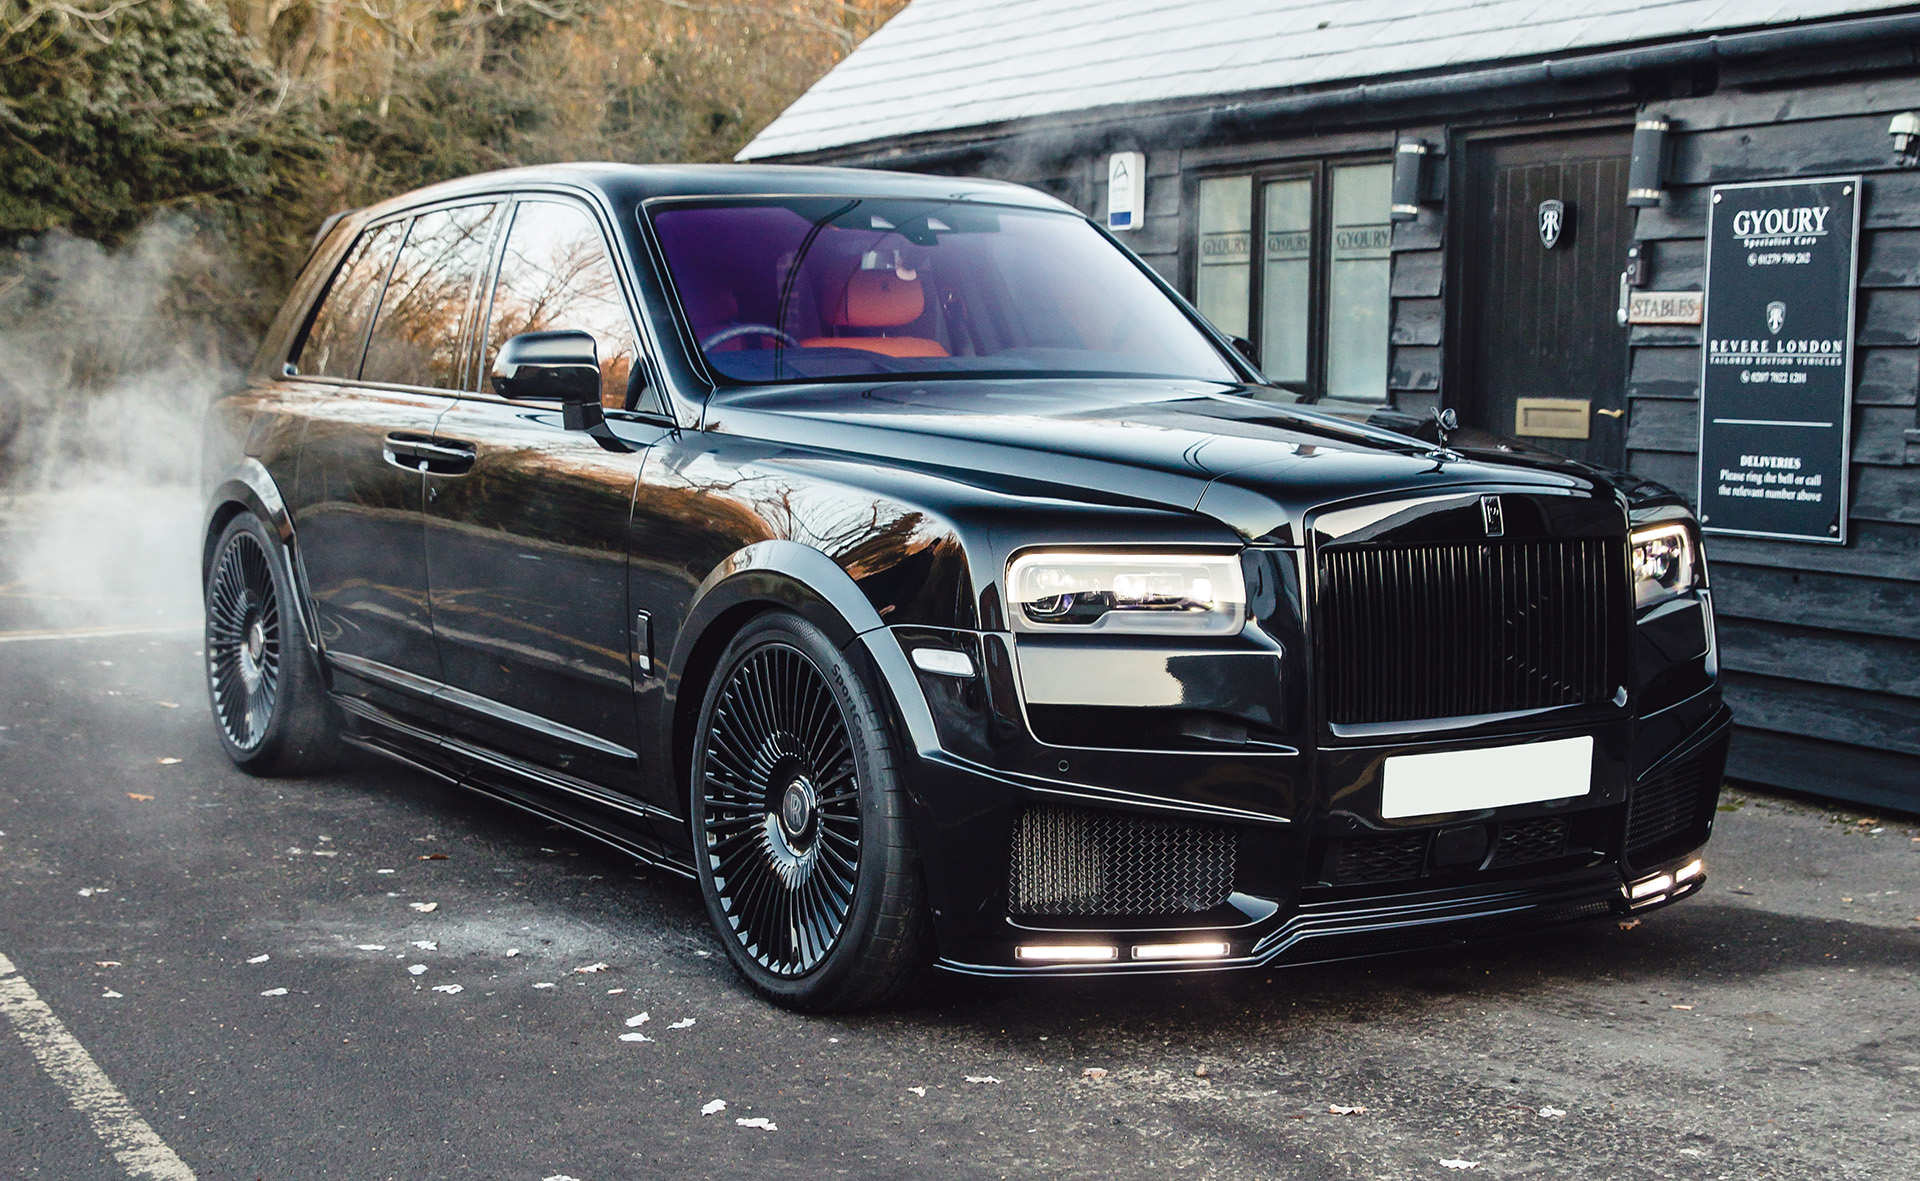 bao mike tyson surprised the world when he gave a rolls royce cullinan to his best friend for helping him find himself after bankruptcy 65339ecae192e Mike Tyson Surprised The World When He Gave A Rolls-royce Cullinan To His Best Friend For Helping Him Find Himself After Bankruptcy.